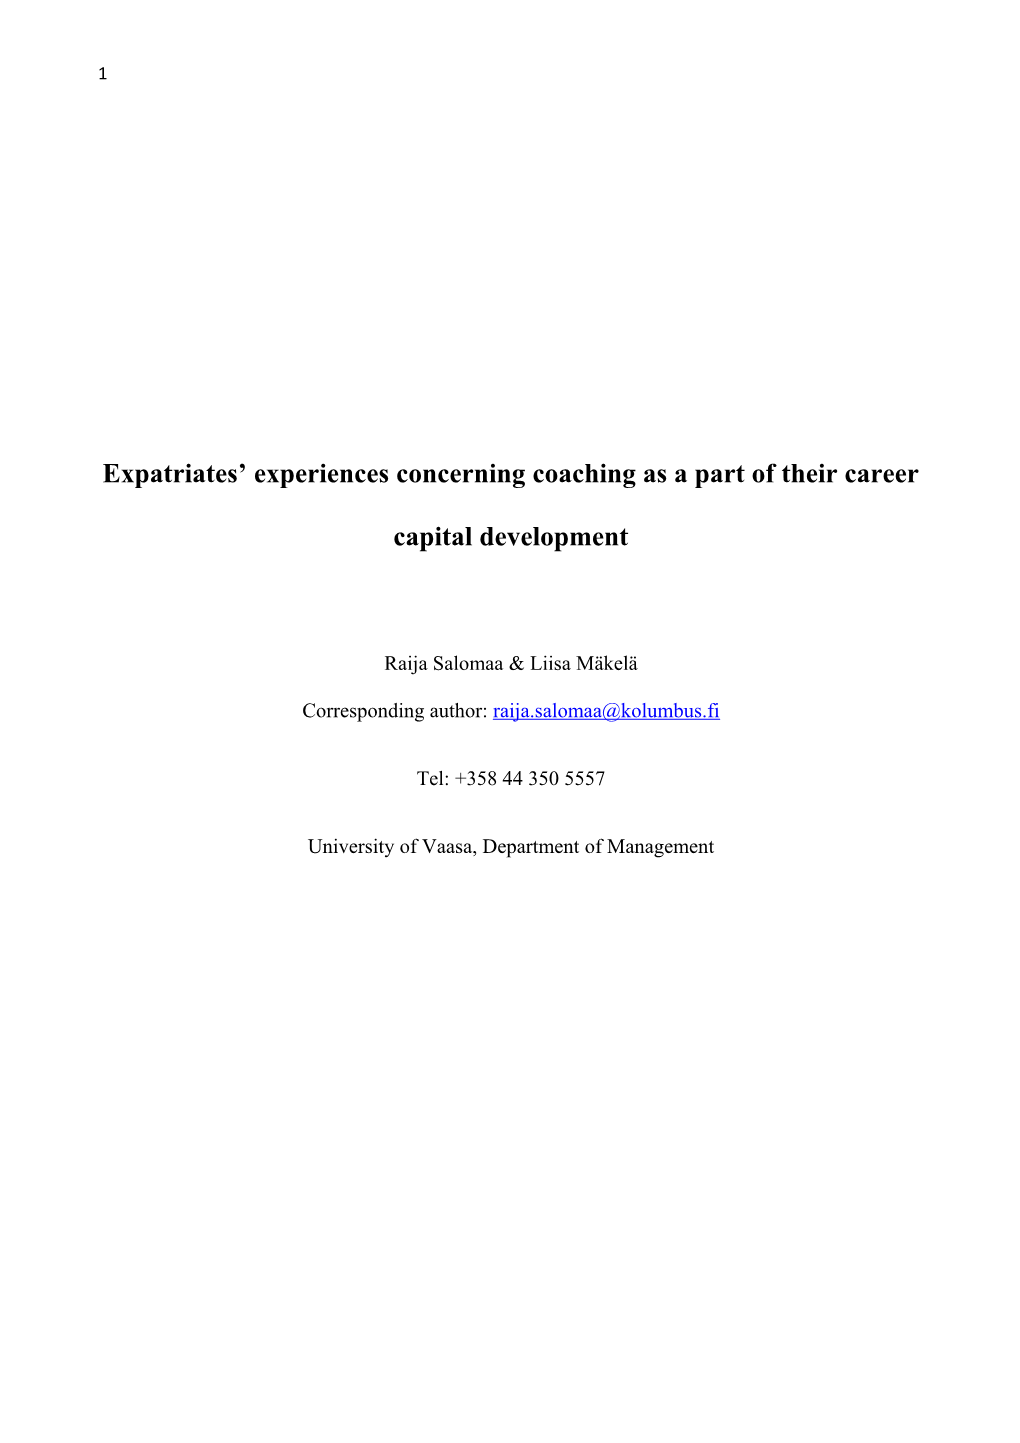 Expatriates Experiences Concerning Coaching As a Part of Their Career Capital Development